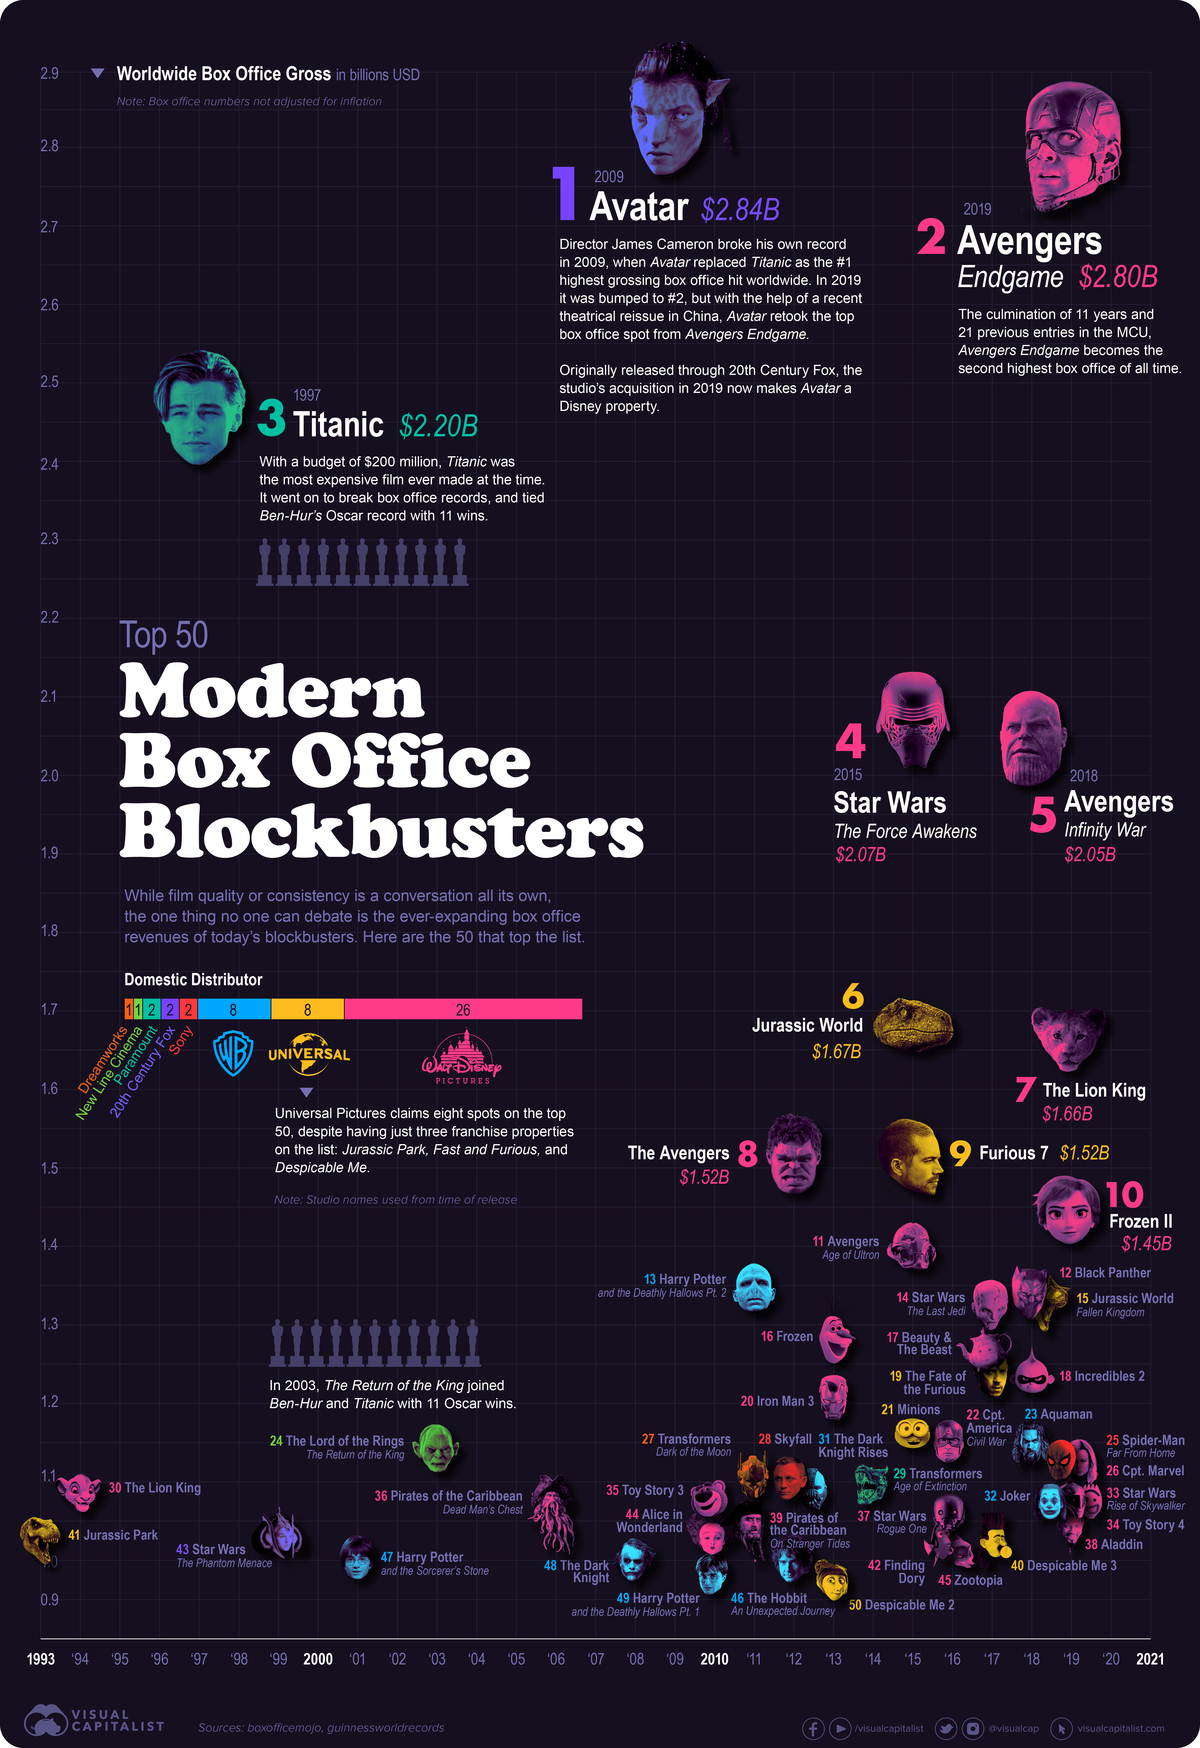 Top Grossing Movies in the Last 30 Years